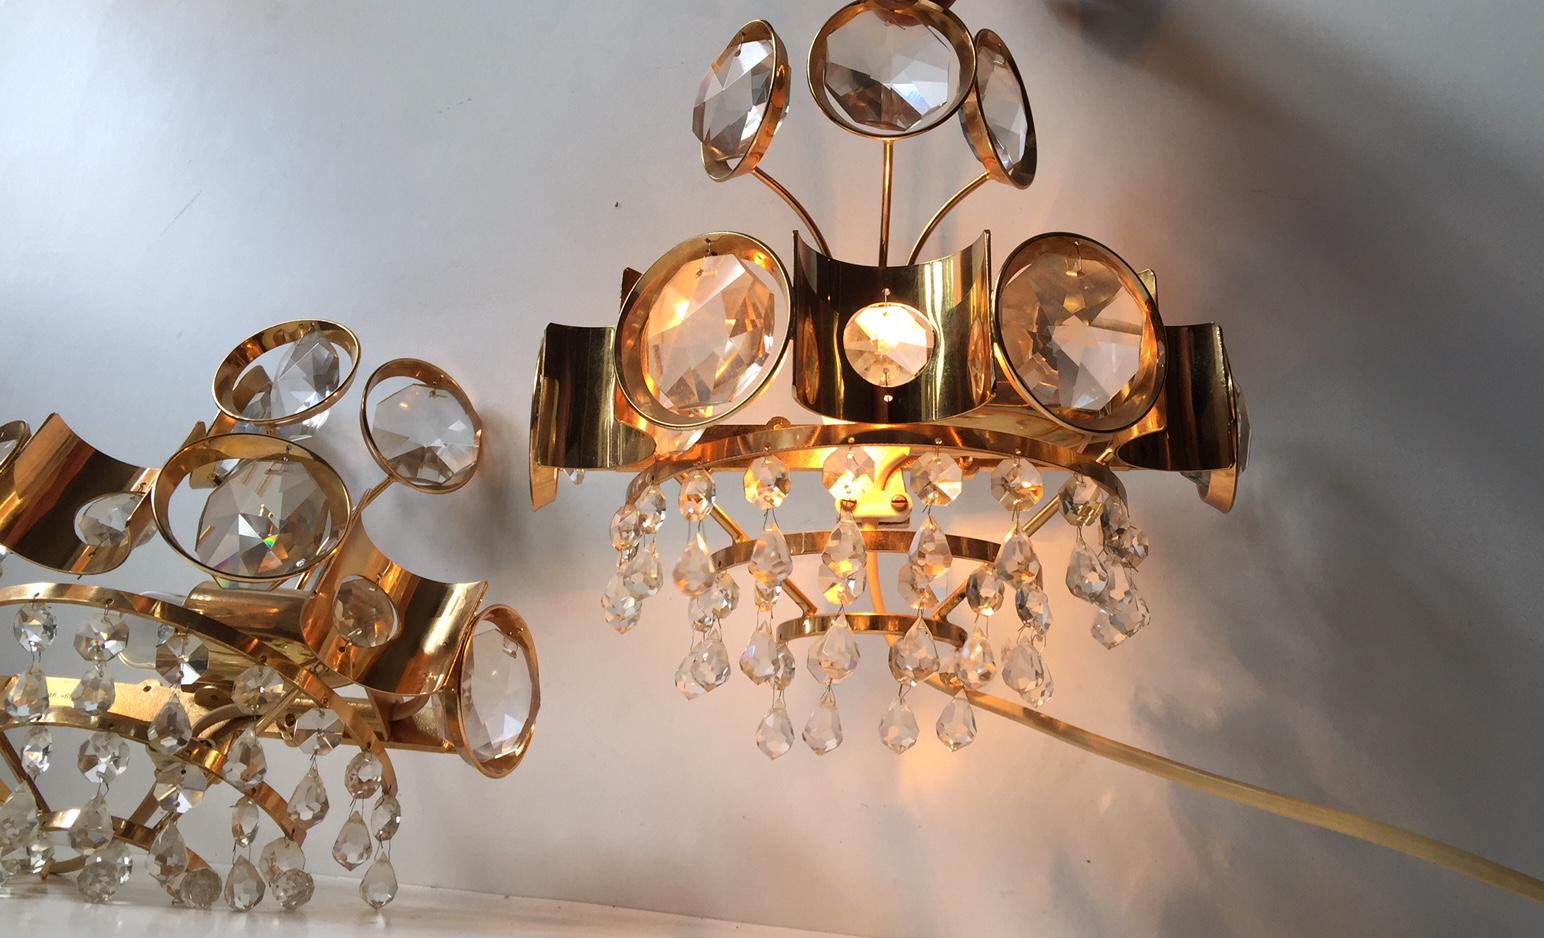 Gilt Pair of Vintage Danish Gilded Sconces with Crystal Prisms from M.P.R, 1970s